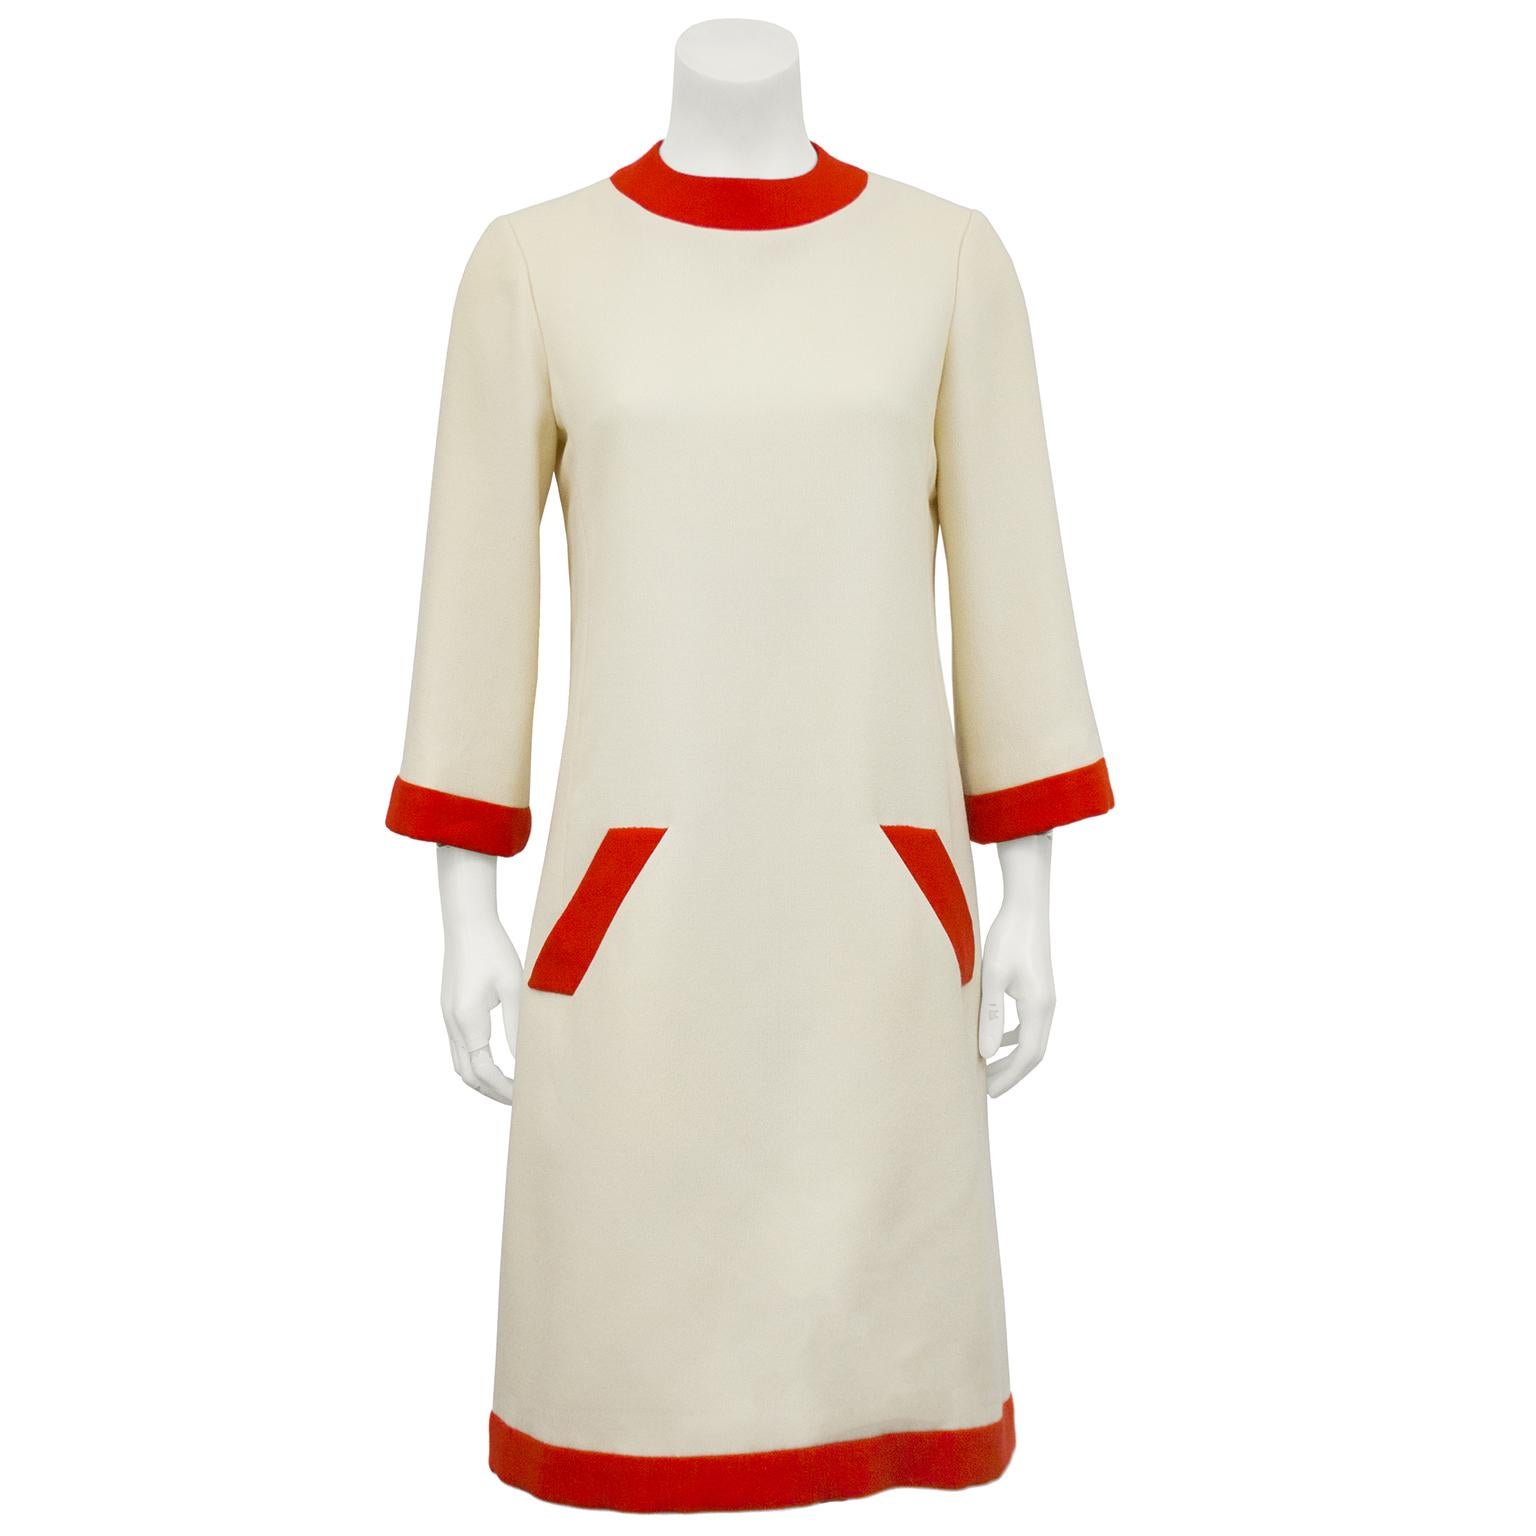 Classic Geoffrey Beene cream and orange long sleeve wool day dress from the 1960s. The A line cream dress has bell style sleeves and is accented with bold stripes of orange at the neckline, cuffs, hemline and along the diagonal side slit pockets.